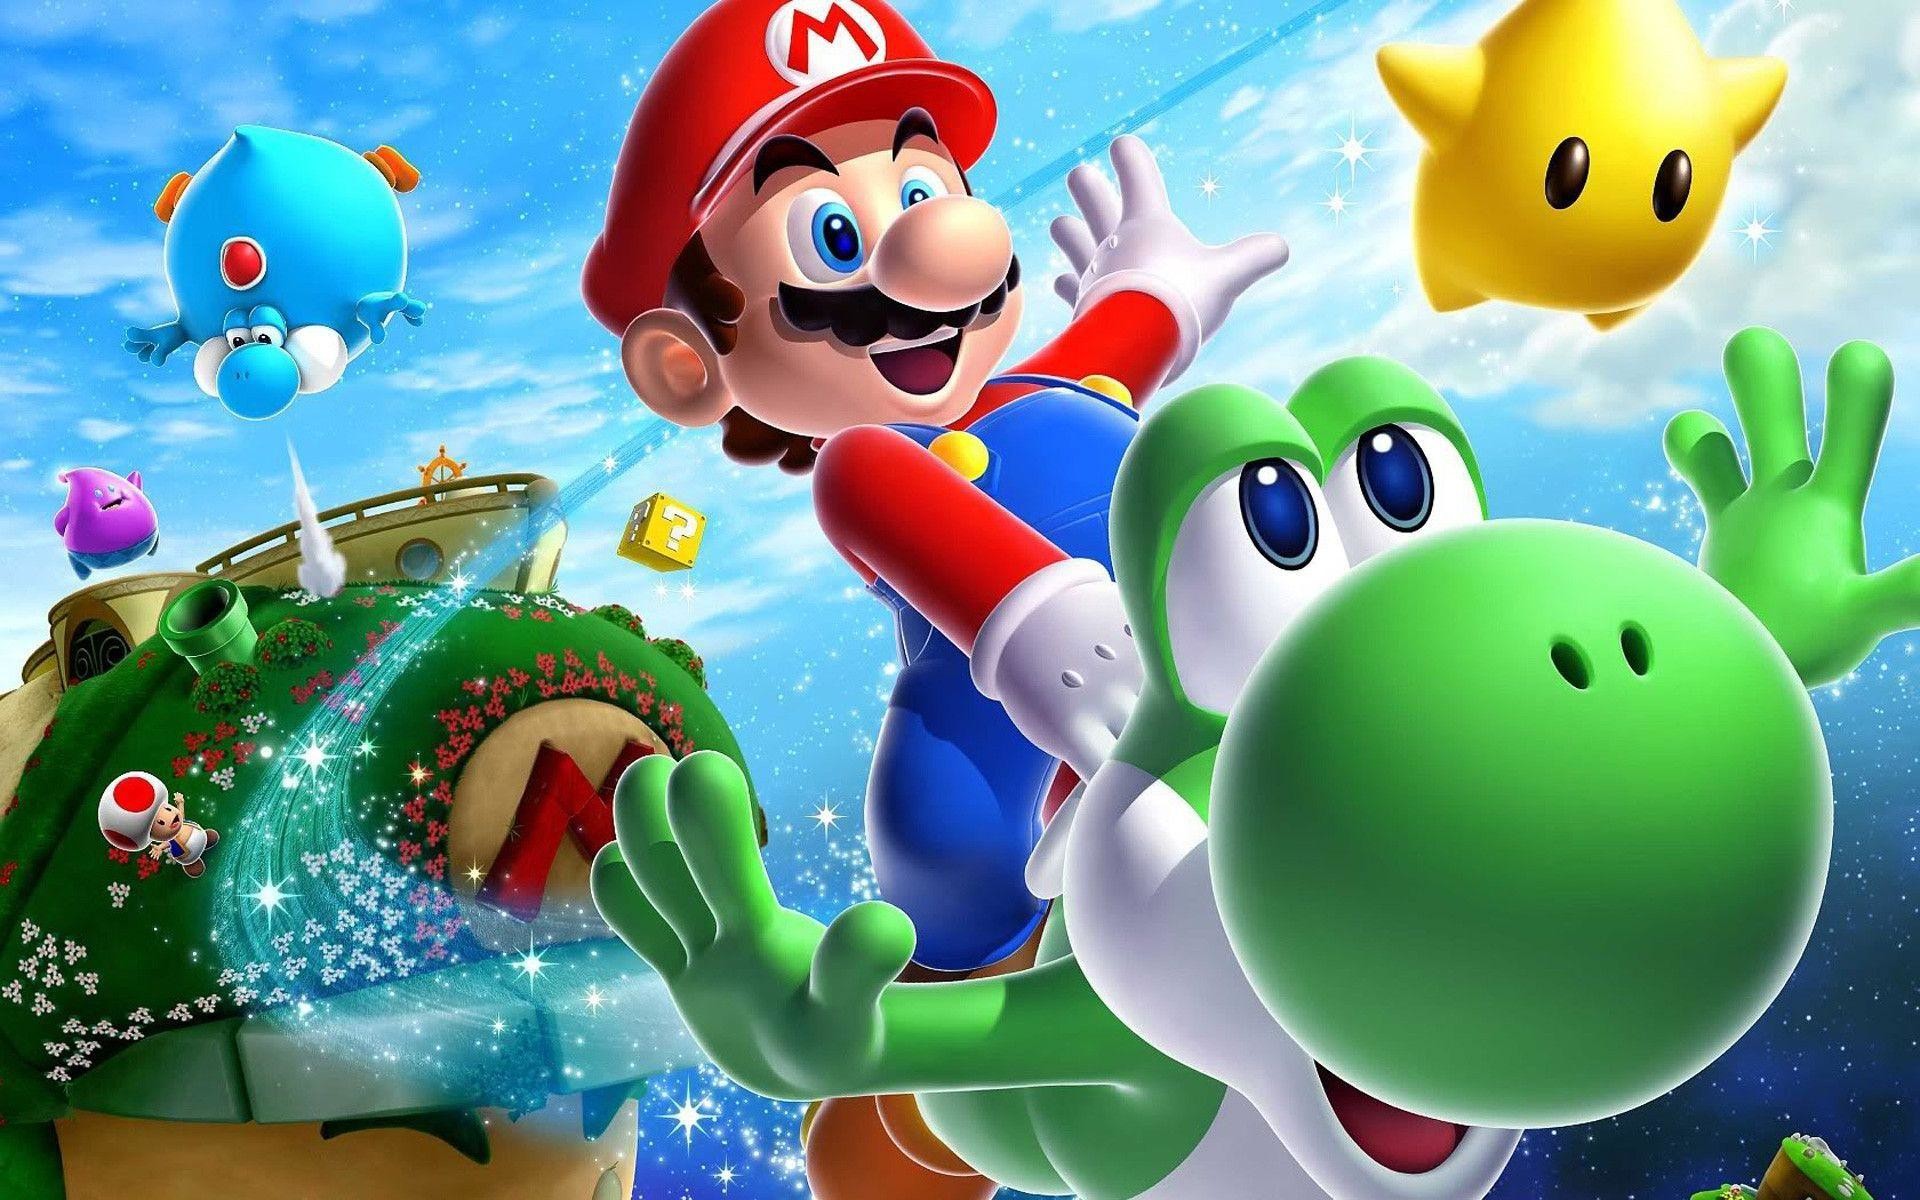 1920x1200 Mario Galaxy Wallpaper 16149 Hd Wallpapers in Games - Telusers.